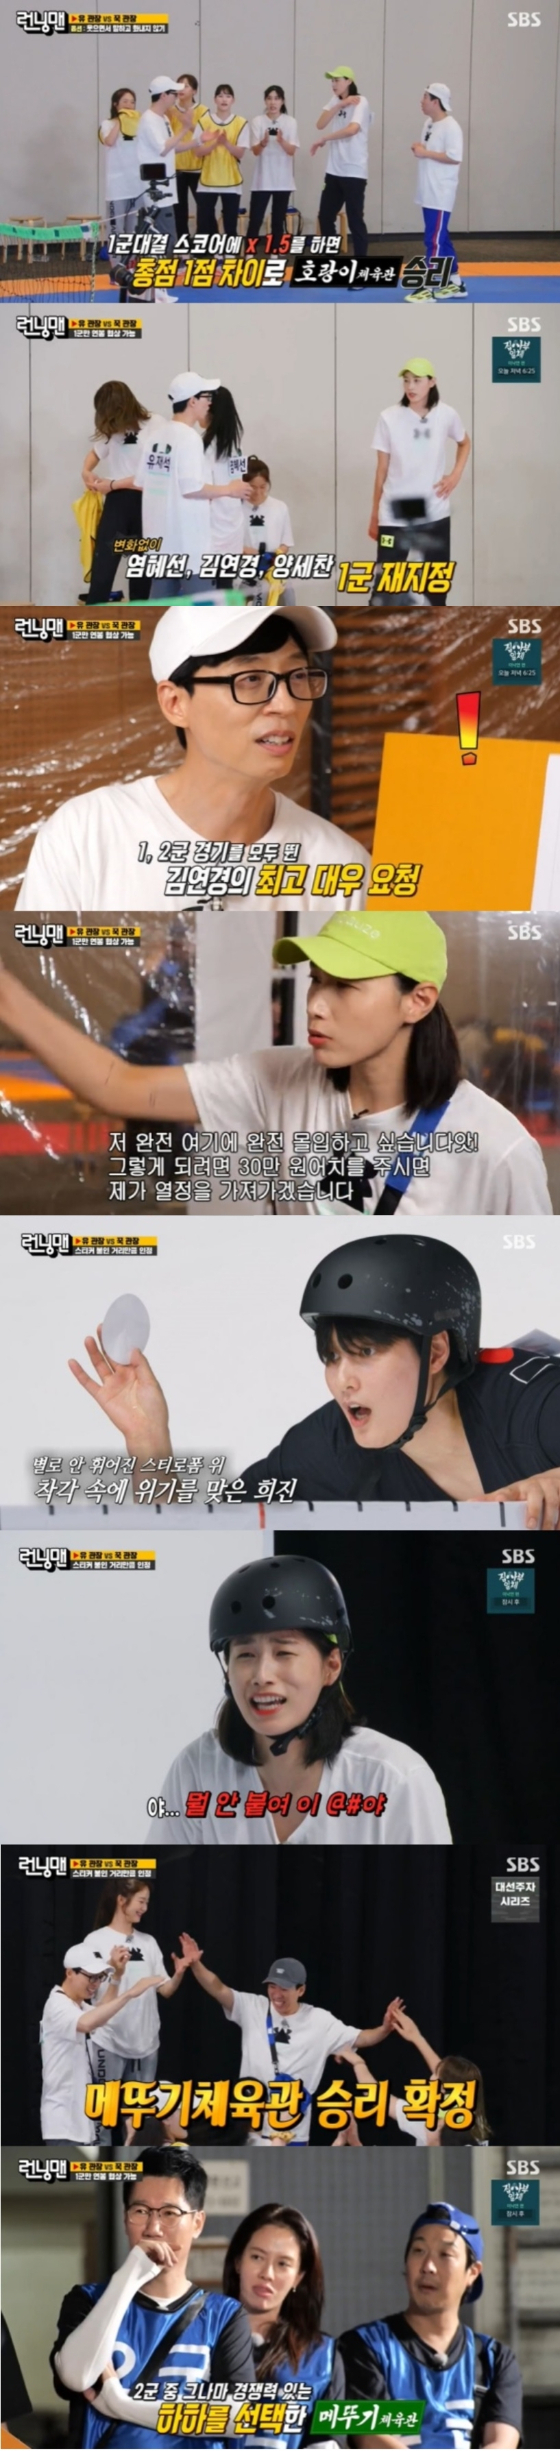 According to Nielsen Korea, a TV viewer rating company on the 4th, SBS entertainment program Running Man, which was broadcasted on the afternoon of the 3rd, ranked 8.8% of the highest TV viewer ratings per minute and 5.9% of the average TV viewer ratings (Seoul Capital Area, household standard).In addition, 2049 TV viewer ratings, a major indicator and target indicator of advertisers, also kept the top spot in the same time zone with 2.9% (Seoul Capital Area, household standard).On this day, Race of the head of the VS Hung Kwan race continued and the last game of the unfinished football Battle was played.In the first round, the Battle of the First Army members Battle Country team won the victory, and in the second round, the team won the second round with a large number of members, but the team won the first round.After the Battle end, each team started Salary Movie - The Negotiation, and Kim Yeon-koungs performance in this process laughed.Yoo Jae-Suk tried to slap Salary, and Kim Yeon-koung demanded 300,000 One, the highest treatment, saying I make a sad sound first.Yoo Jae-Suk to the strongly pushing Kim Yeon-koung said, Youre a miner? Furious and Kim Yeon-koung eventually re-signed for 230,000 One.Then, a sticker on the bridge was attached to Battle. Song Ji-hyo and Kim Yeon-koung were outstanding.Song Ji-hyo flew and sent hearts to panic the director, saying, My brother (successed).On the other hand, Kim Yeon-koung of Yus team was not able to play properly because he was scared, and the team of the manager was laughing when he turned into a unique bread sisterThe scene was the best TV viewer rating per minute with 8.8%, and the team won the best one minute.Another Salary Movie - The Negotiation Time was given.Yoo Jae-Suk decided on the trade of Jeon So-min, saying, Someone went to another team and found out Salary. Jeon So-min and Haha were traded.Next weeks broadcast will feature the final Battle of the two manager teams.